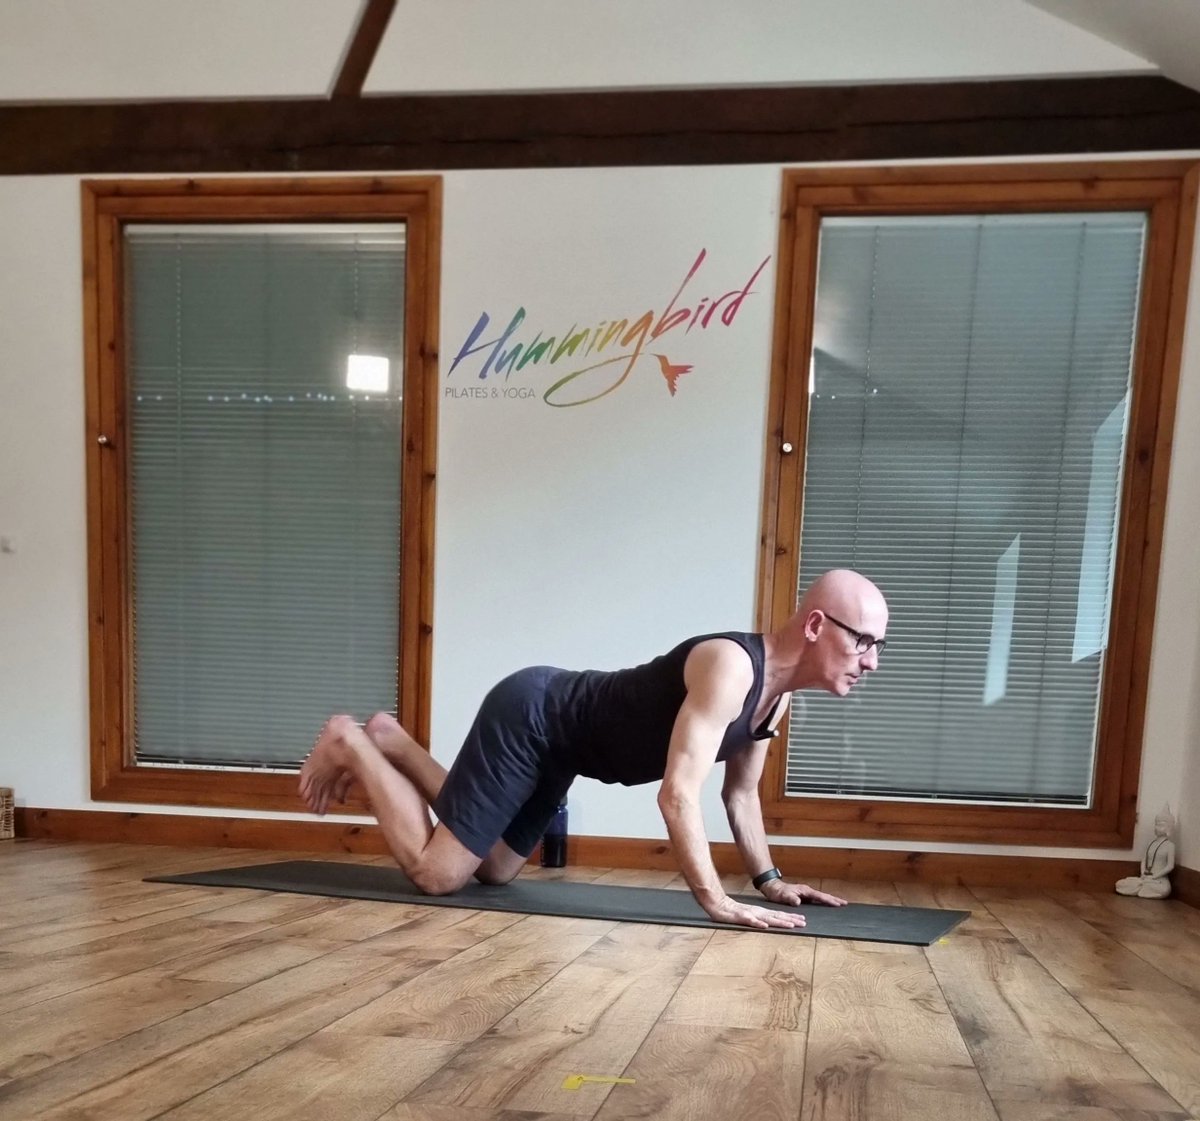 Just one class on today - Steve will be in the studio (and zooming into your homes if you're joining online) at 11.30am with Beginners Hatha Yoga. #hummingbirdpilatesyoga #hummingbird #pilates #yoga #yogastudio #pilatesstudio #writtle #essex #thursday #hathayoga #hatha